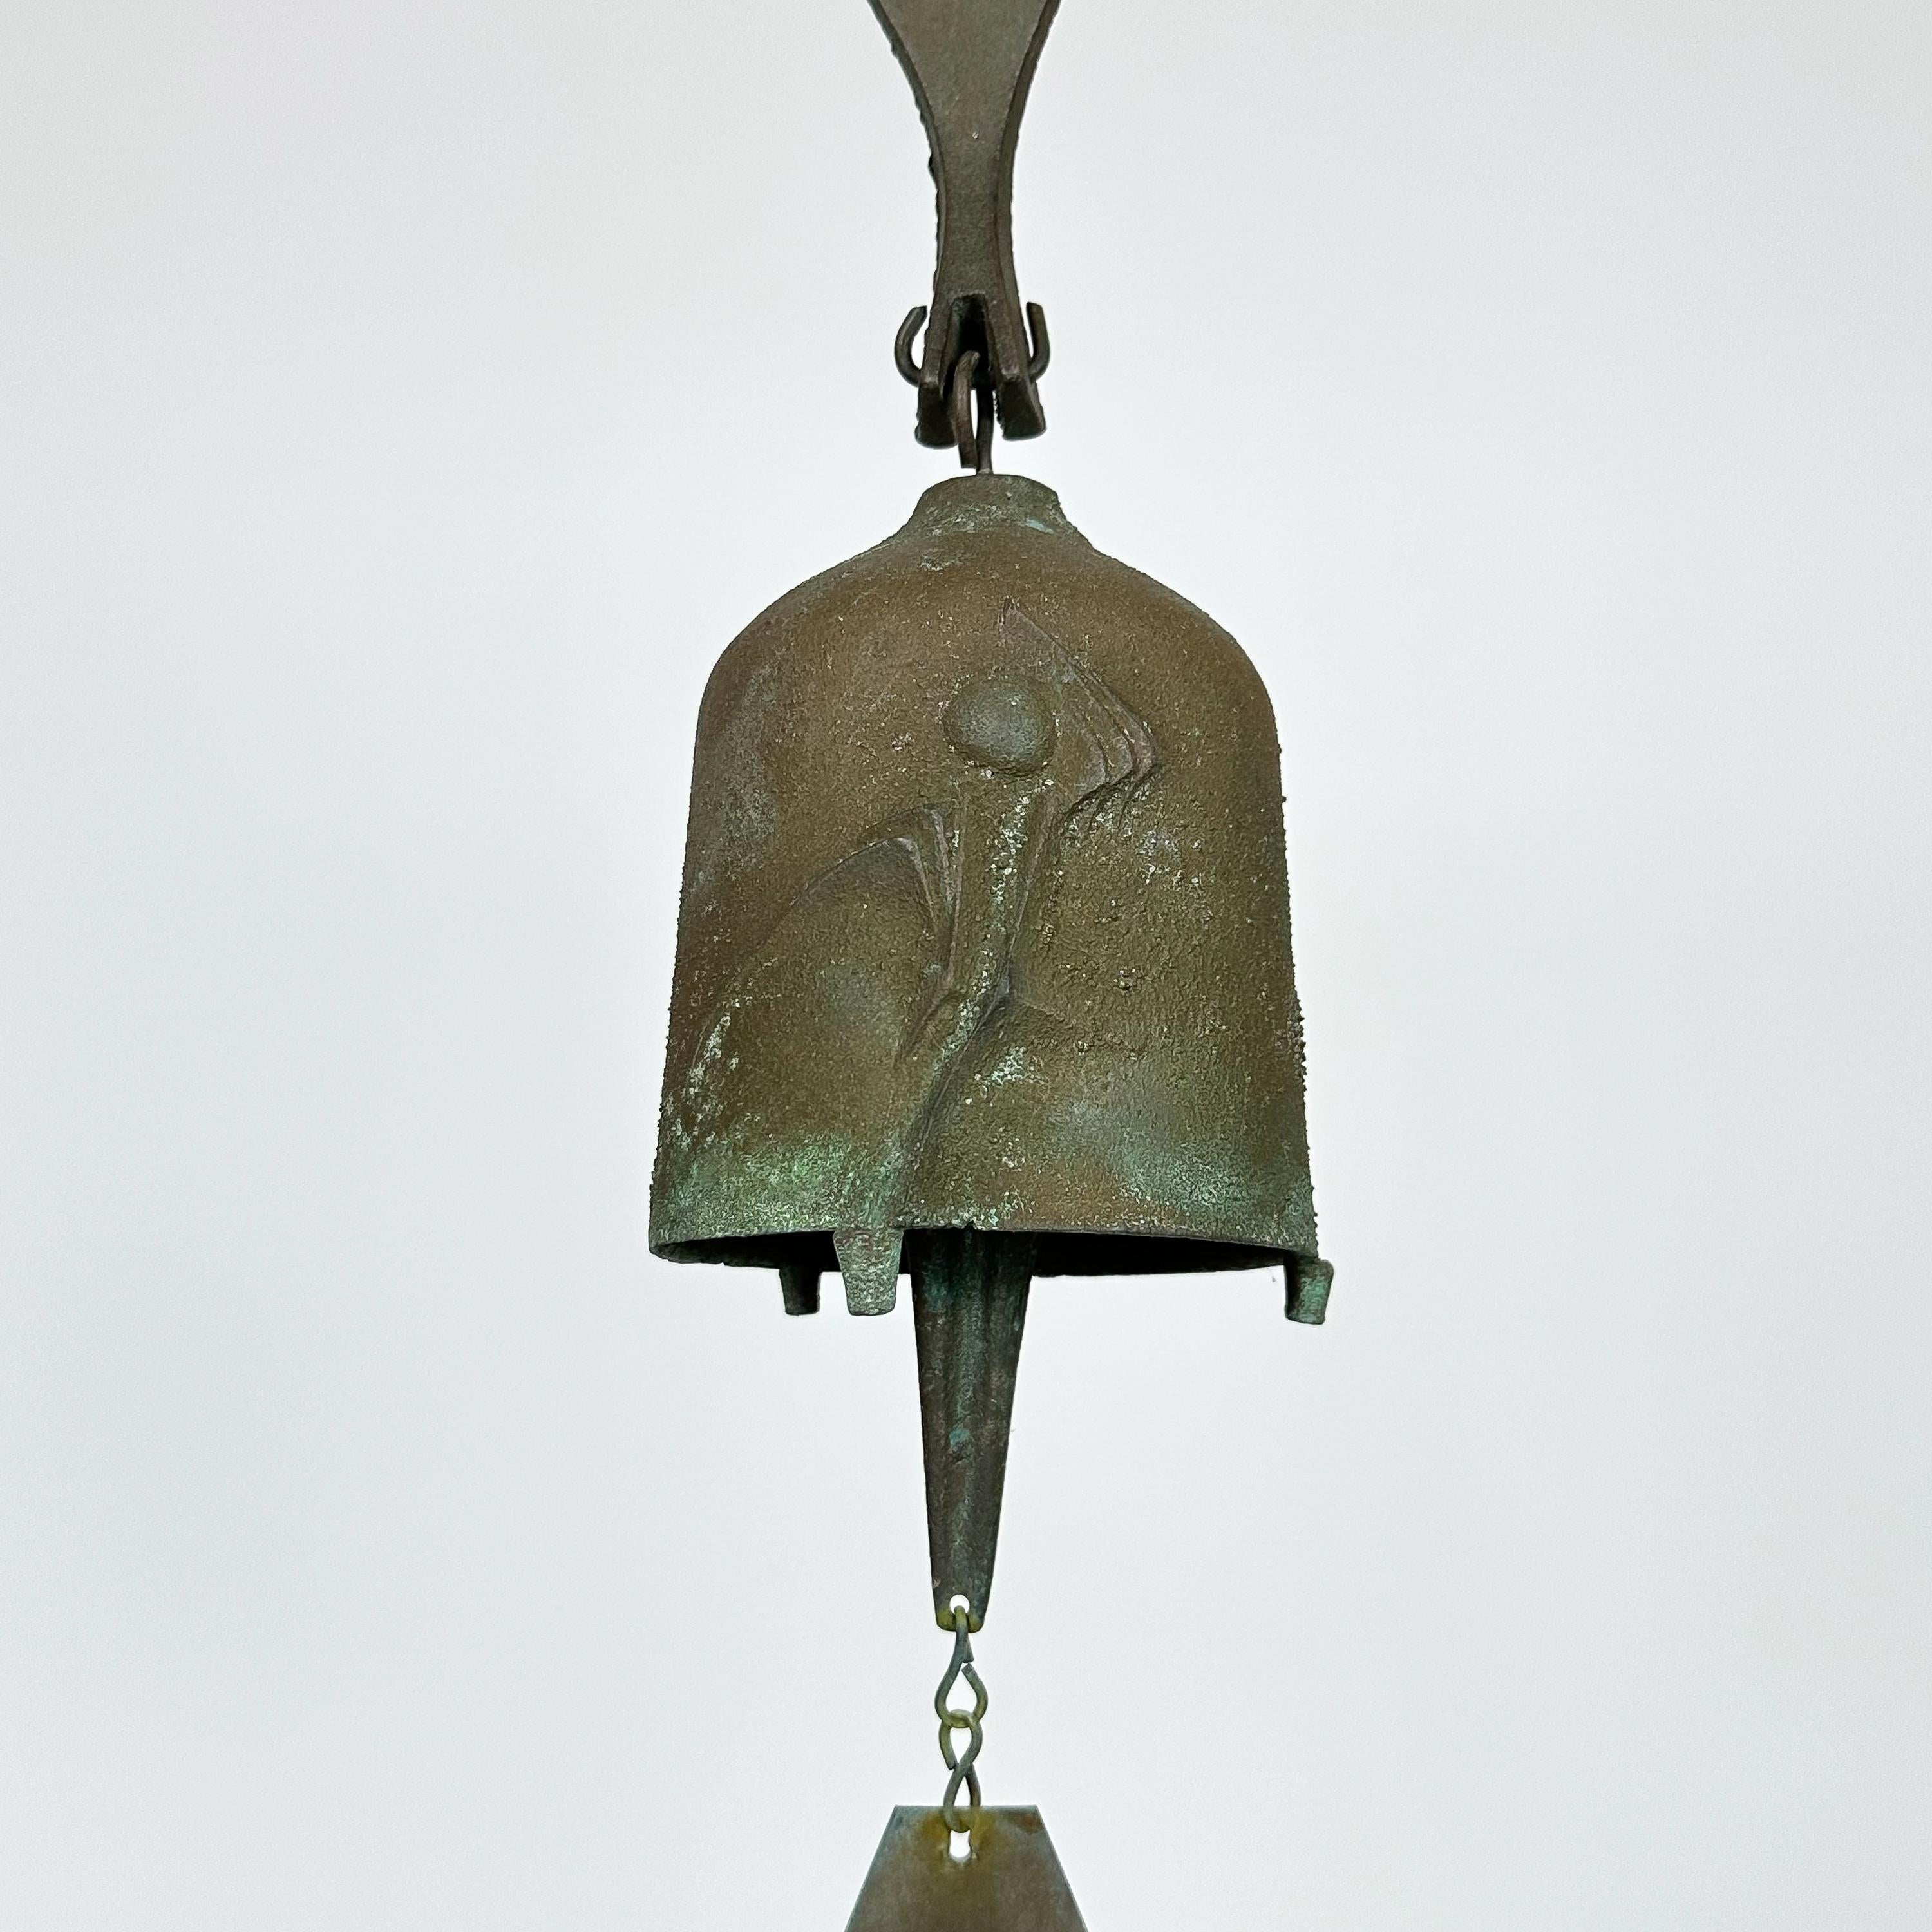 Cast Set of 3 Bronze Bells / Wind Chimes by Paolo Soleri for Arcosanti